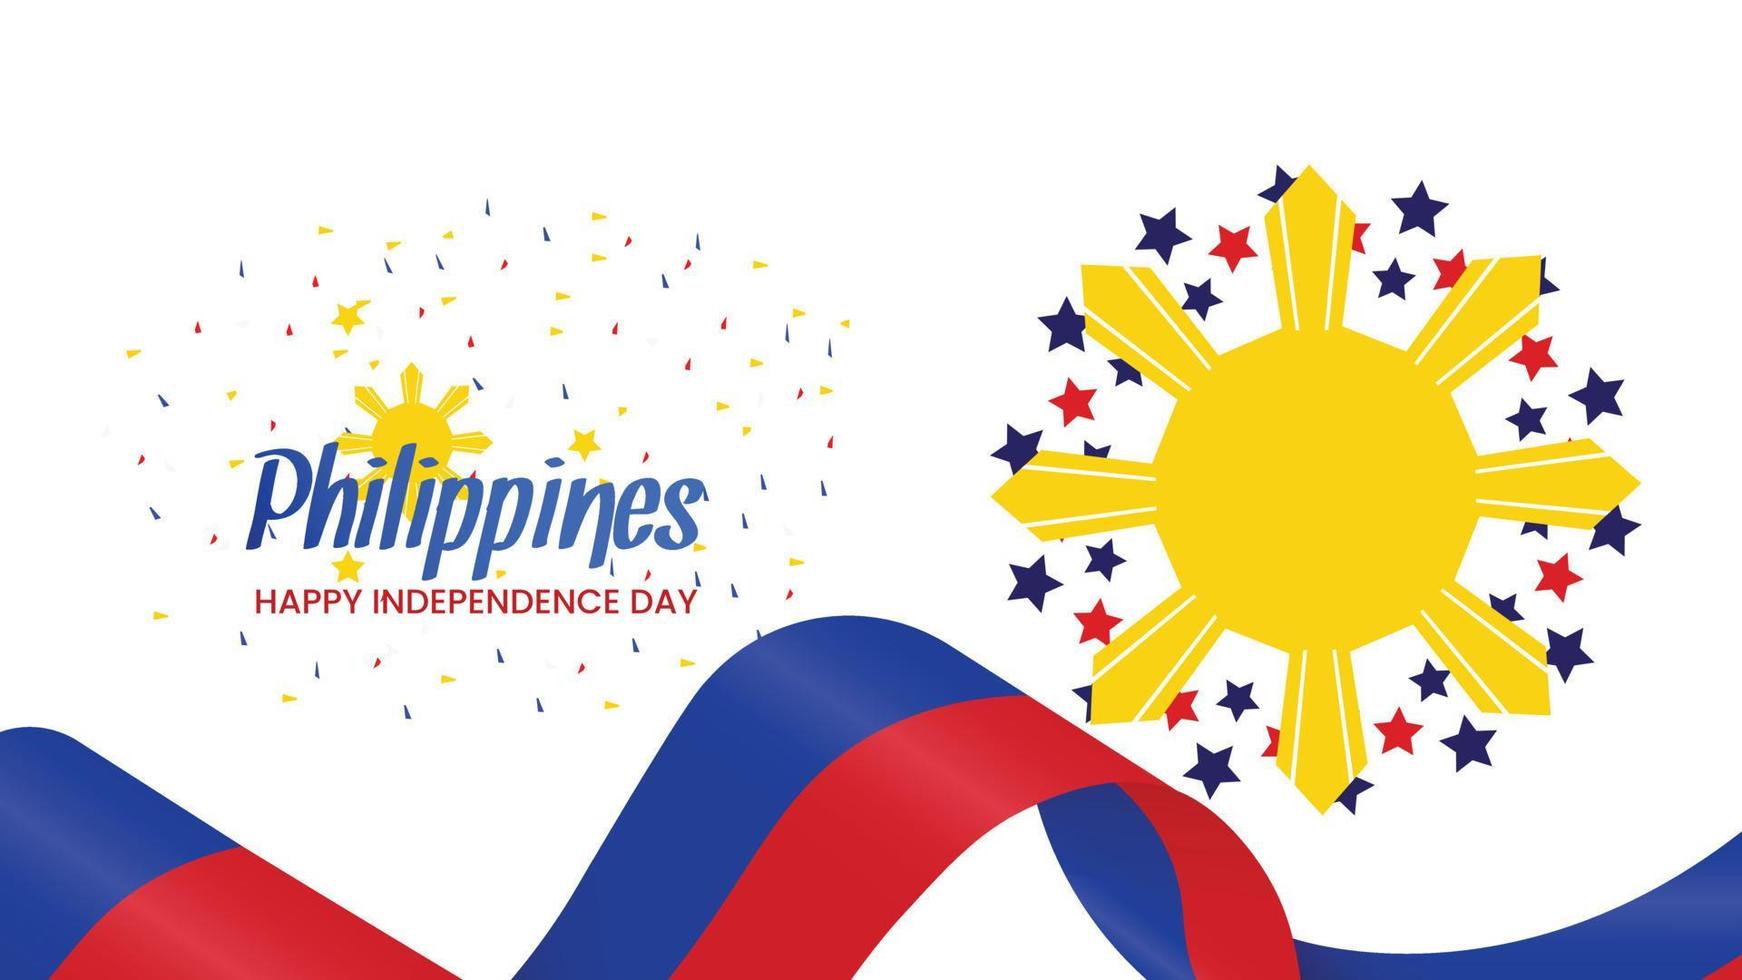 phillipines independence day wishing banner design vector file